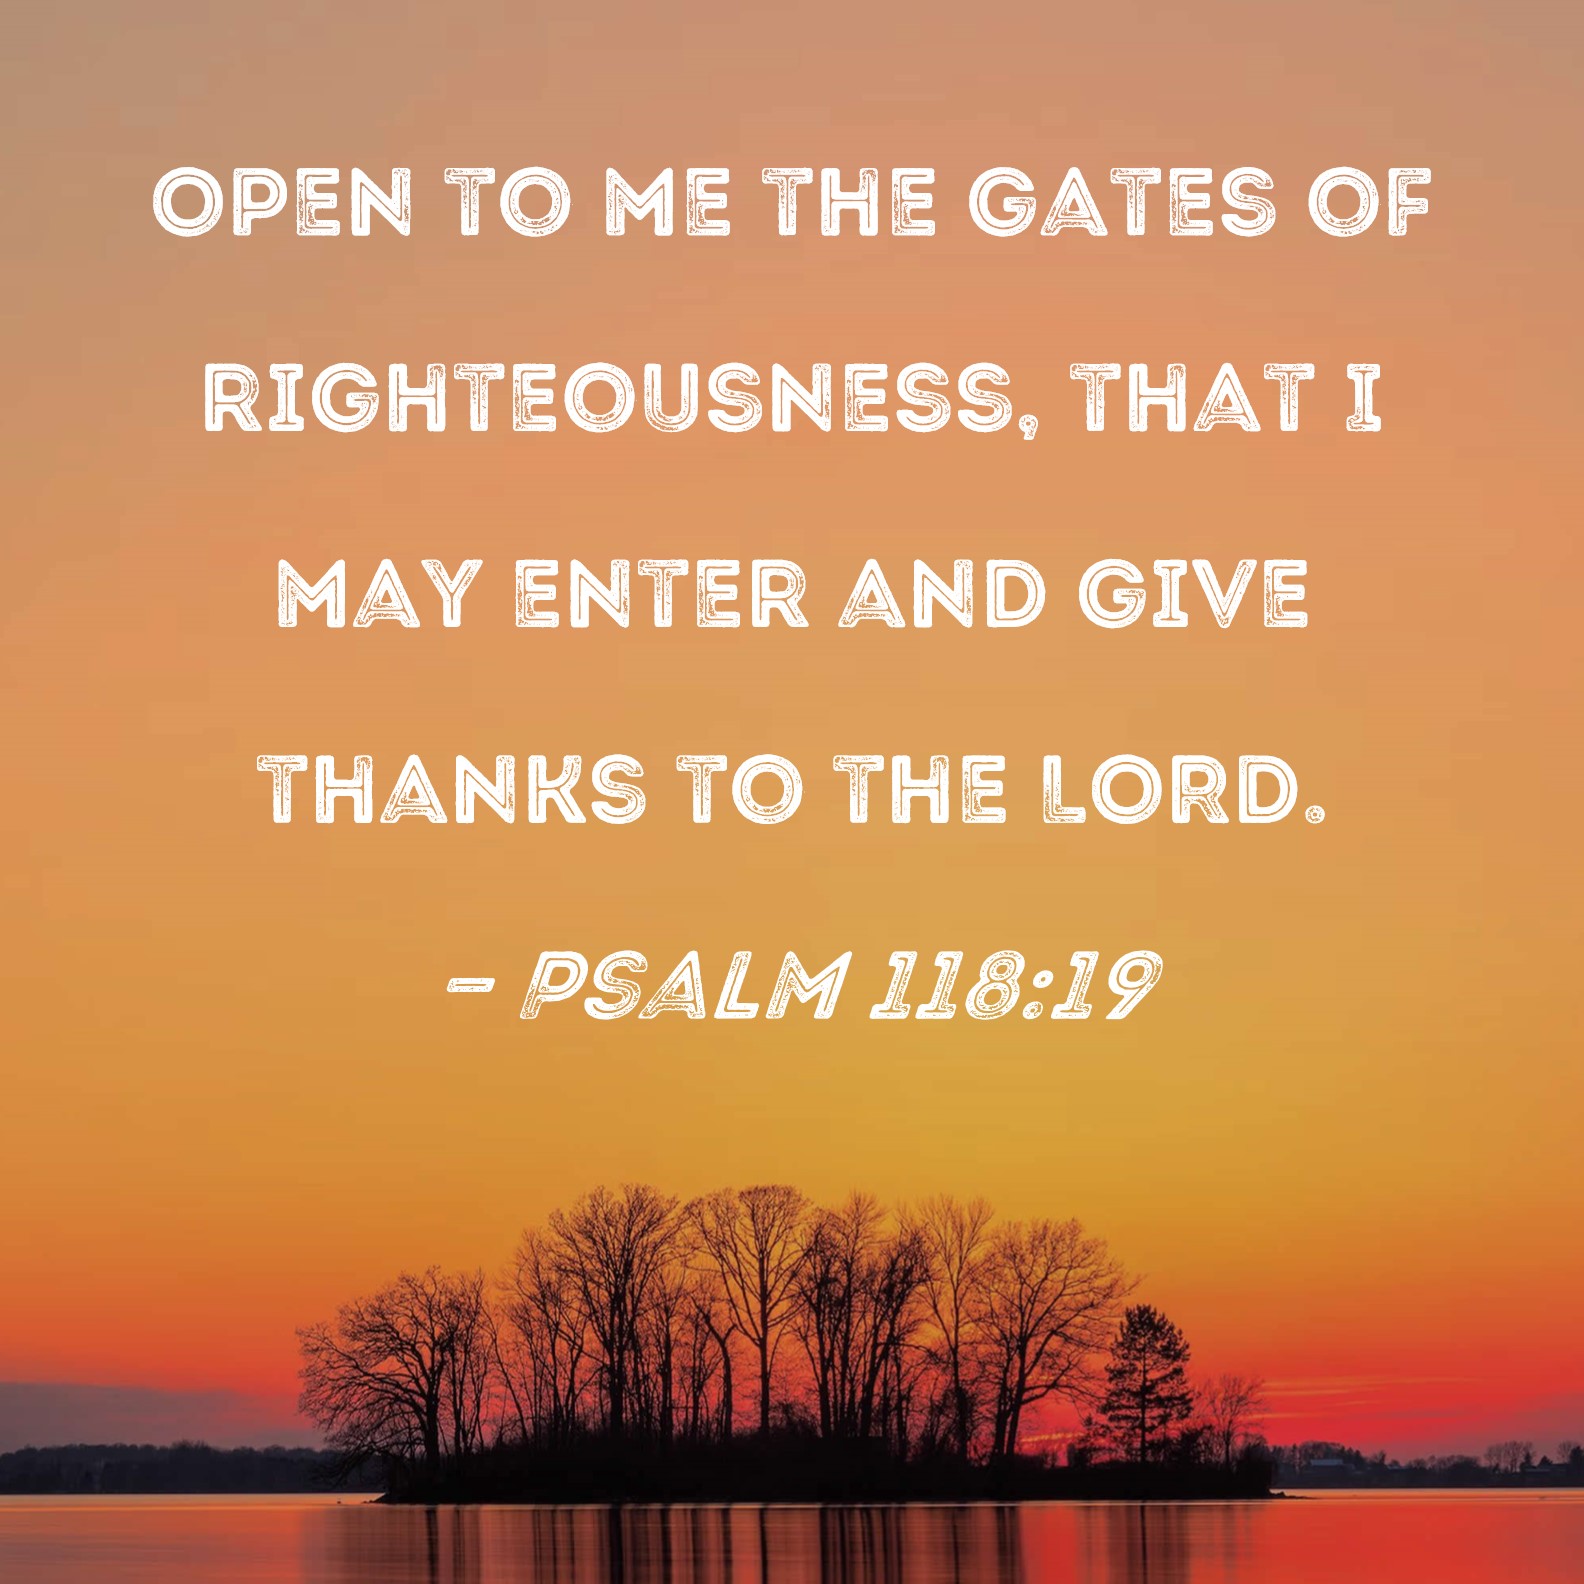 psalm-118-19-open-to-me-the-gates-of-righteousness-that-i-may-enter